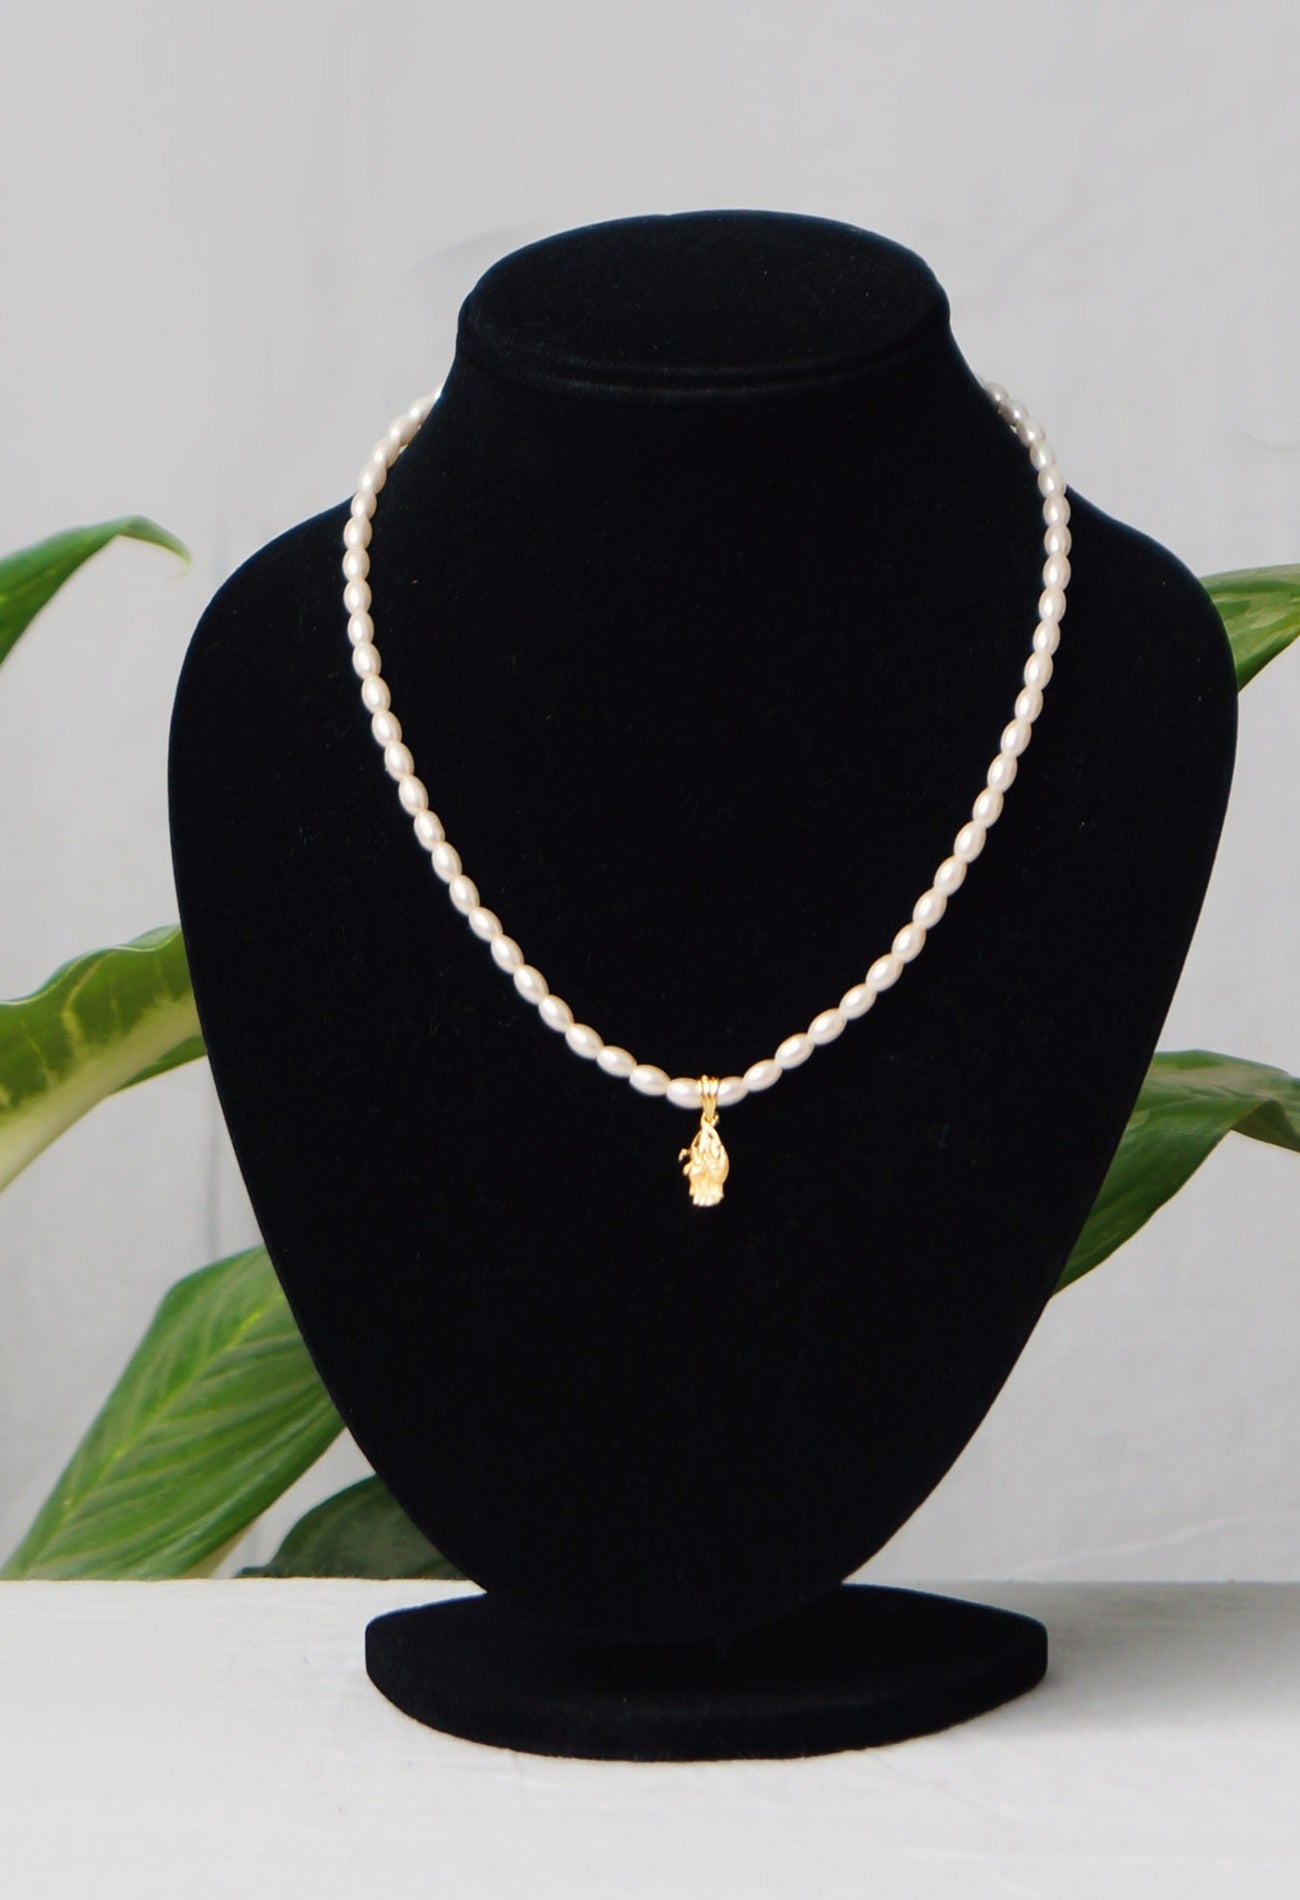 White Amravati Oval Pearls Beads with Micro Gold Plated Pendant-UJ293